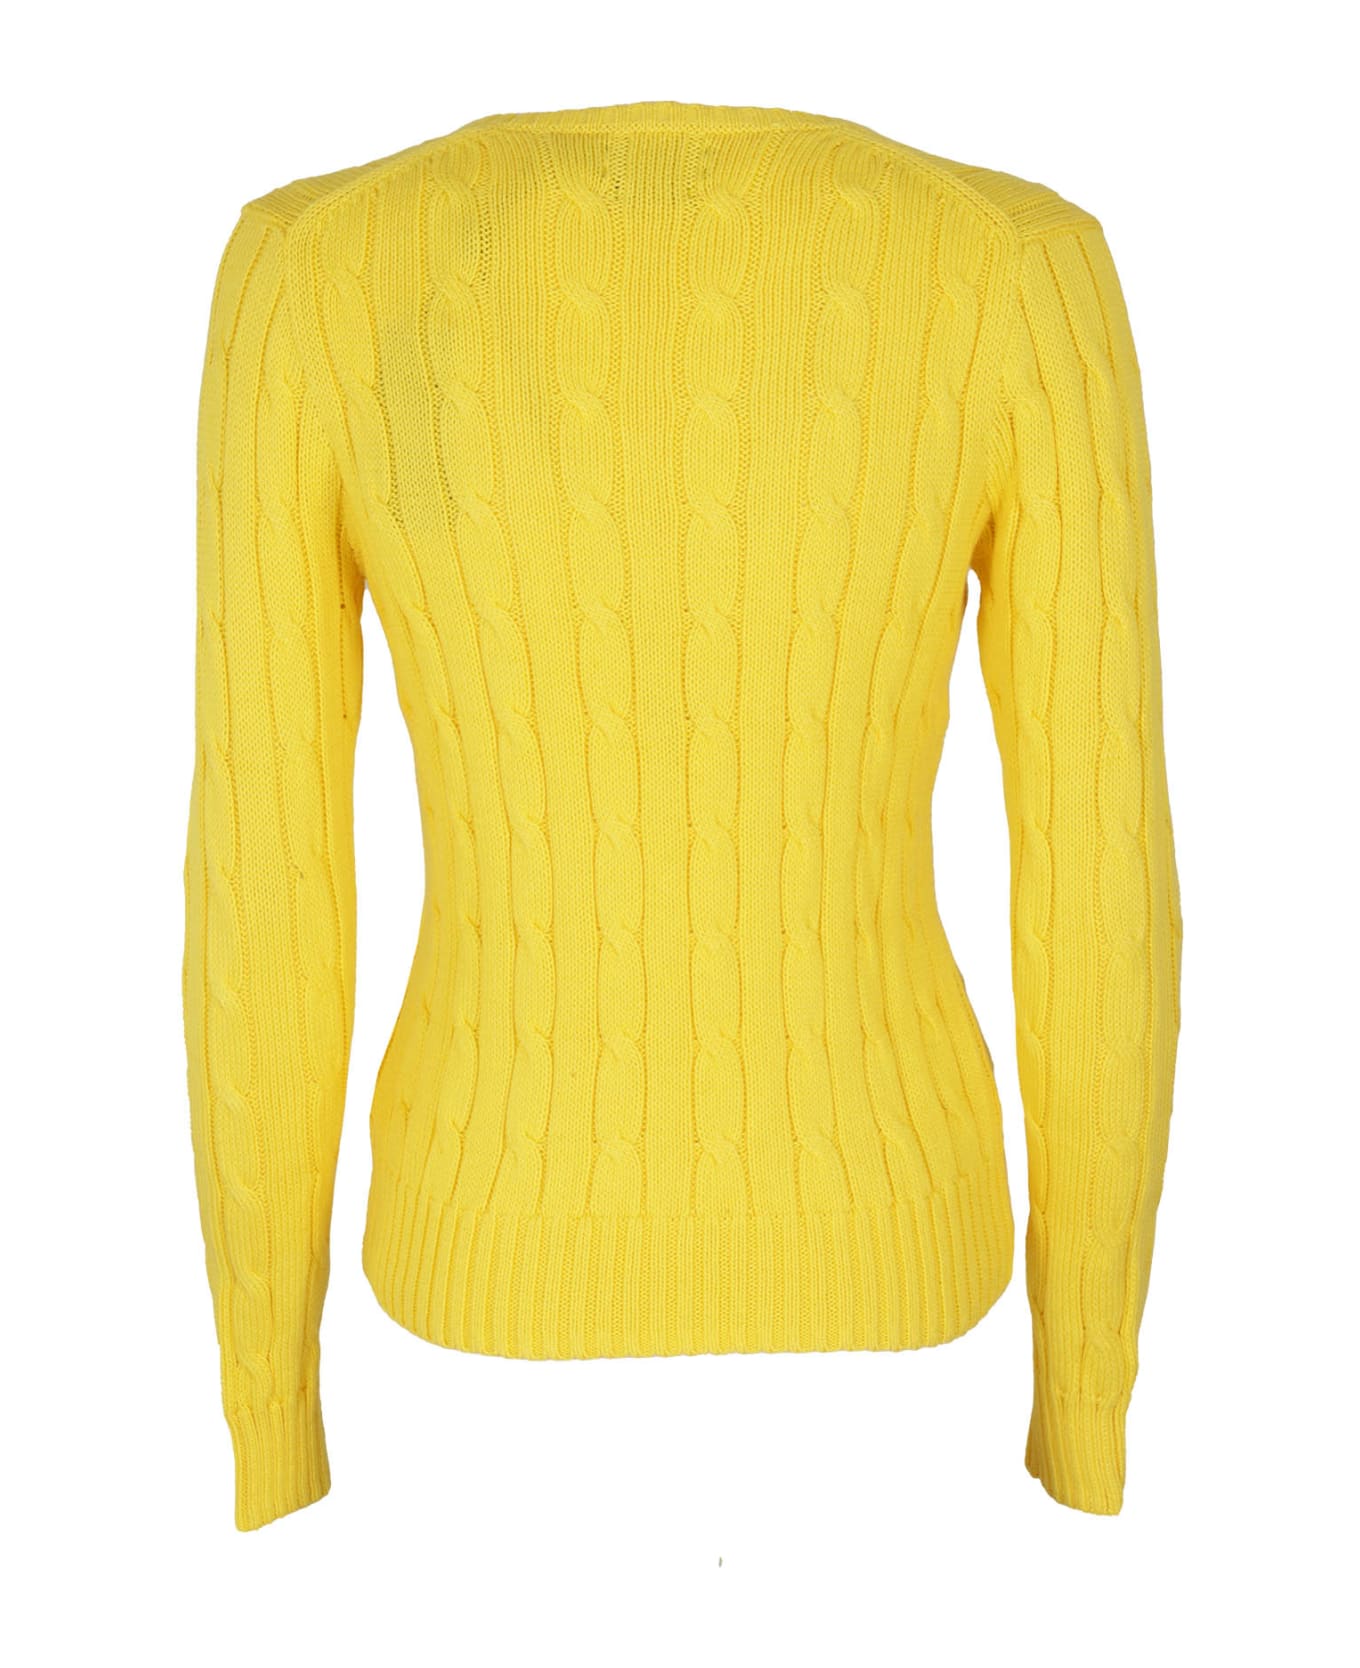 Polo Ralph Lauren Kimberly Cable-knitted V-neck Jumper - Trainer Yellow